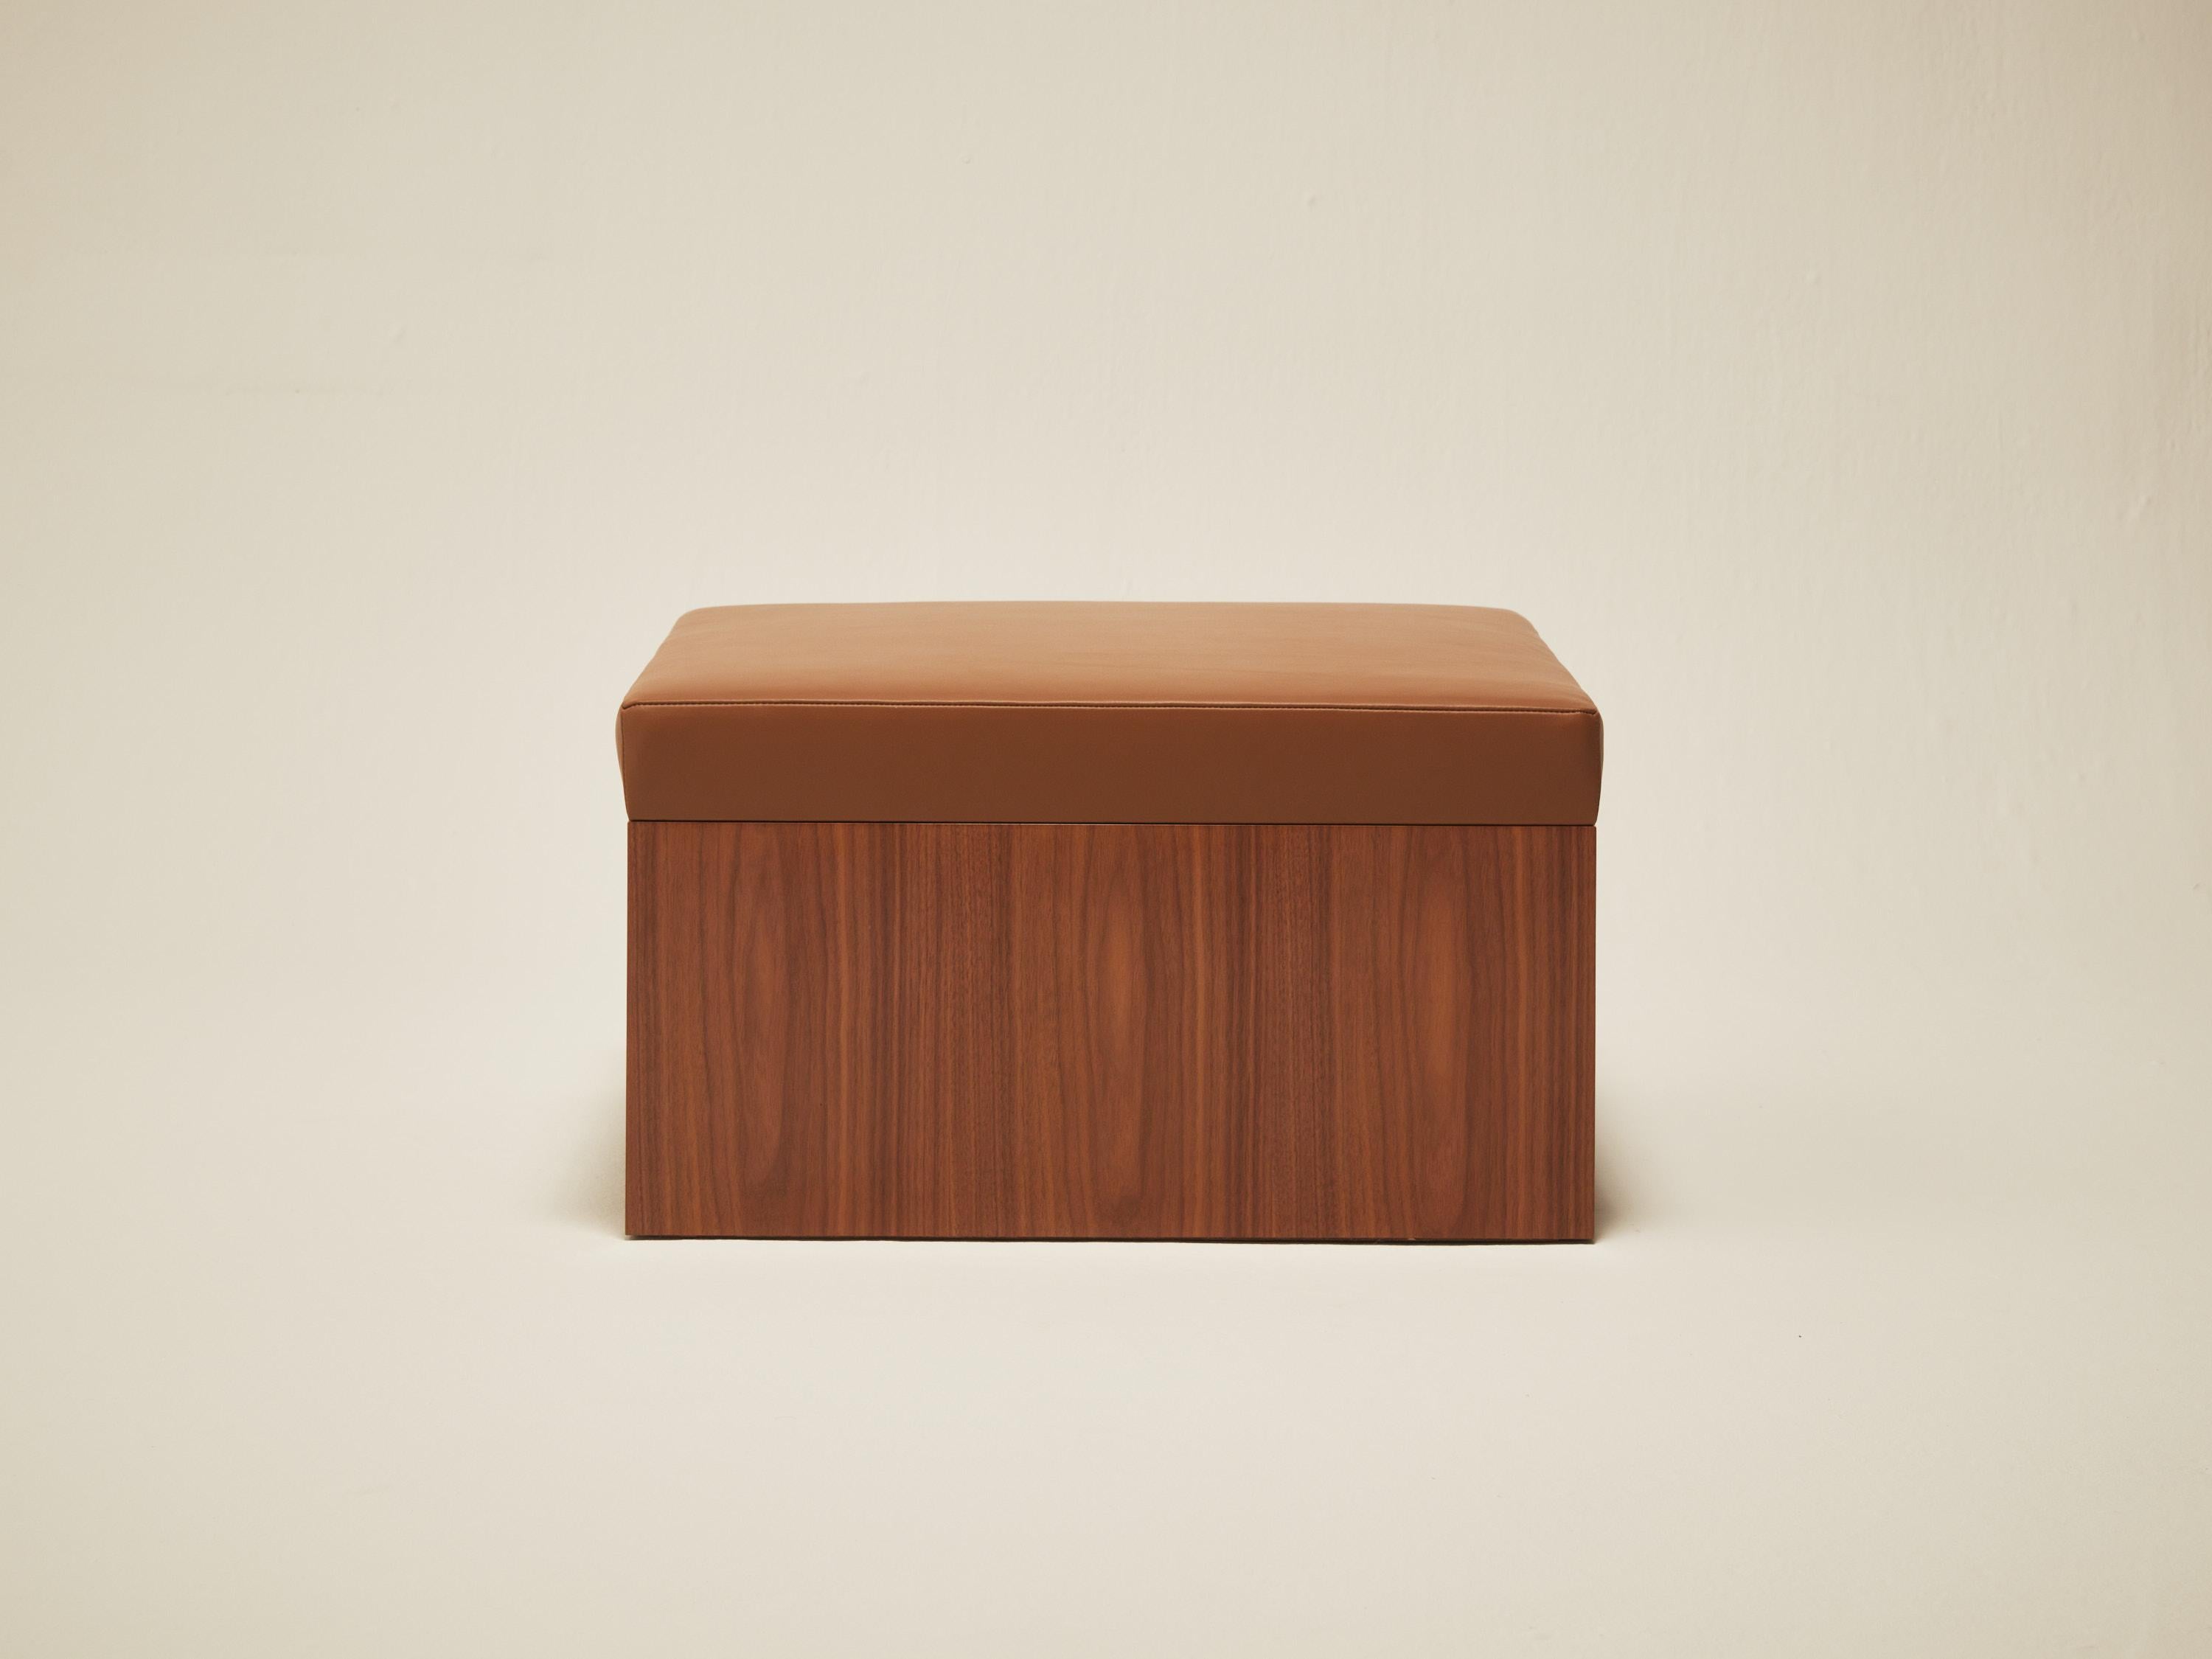 Hand-Crafted Continuous Ottoman - Hand applied wood veneer & leather upholstery For Sale